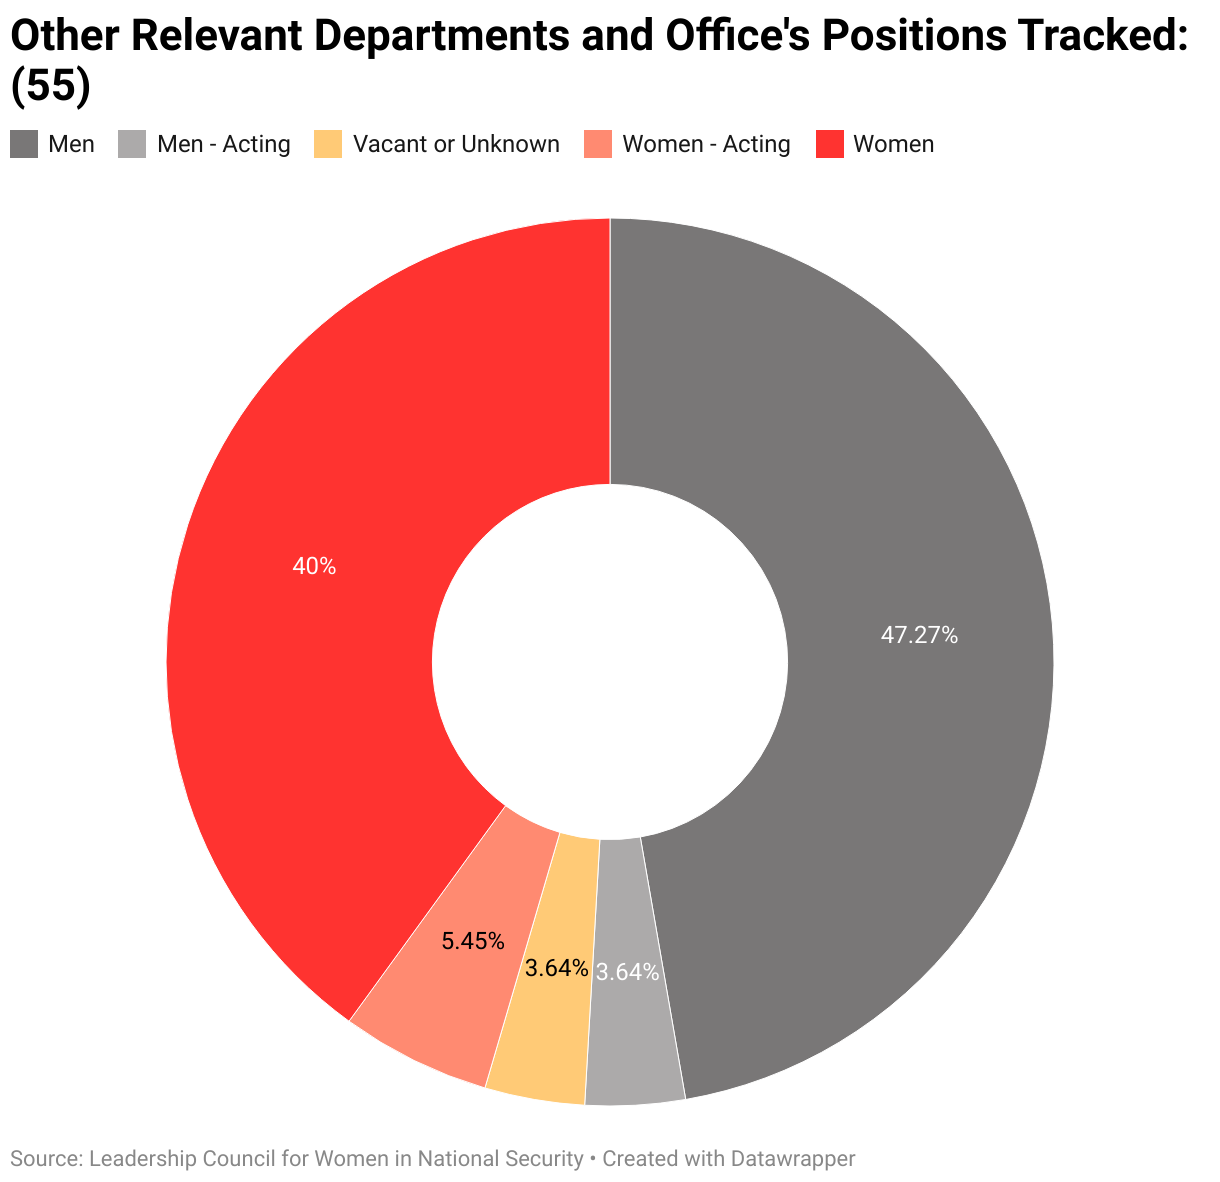 The gendered breakdown of all other relevant departments and office's positions tracked by LCWINS (55).